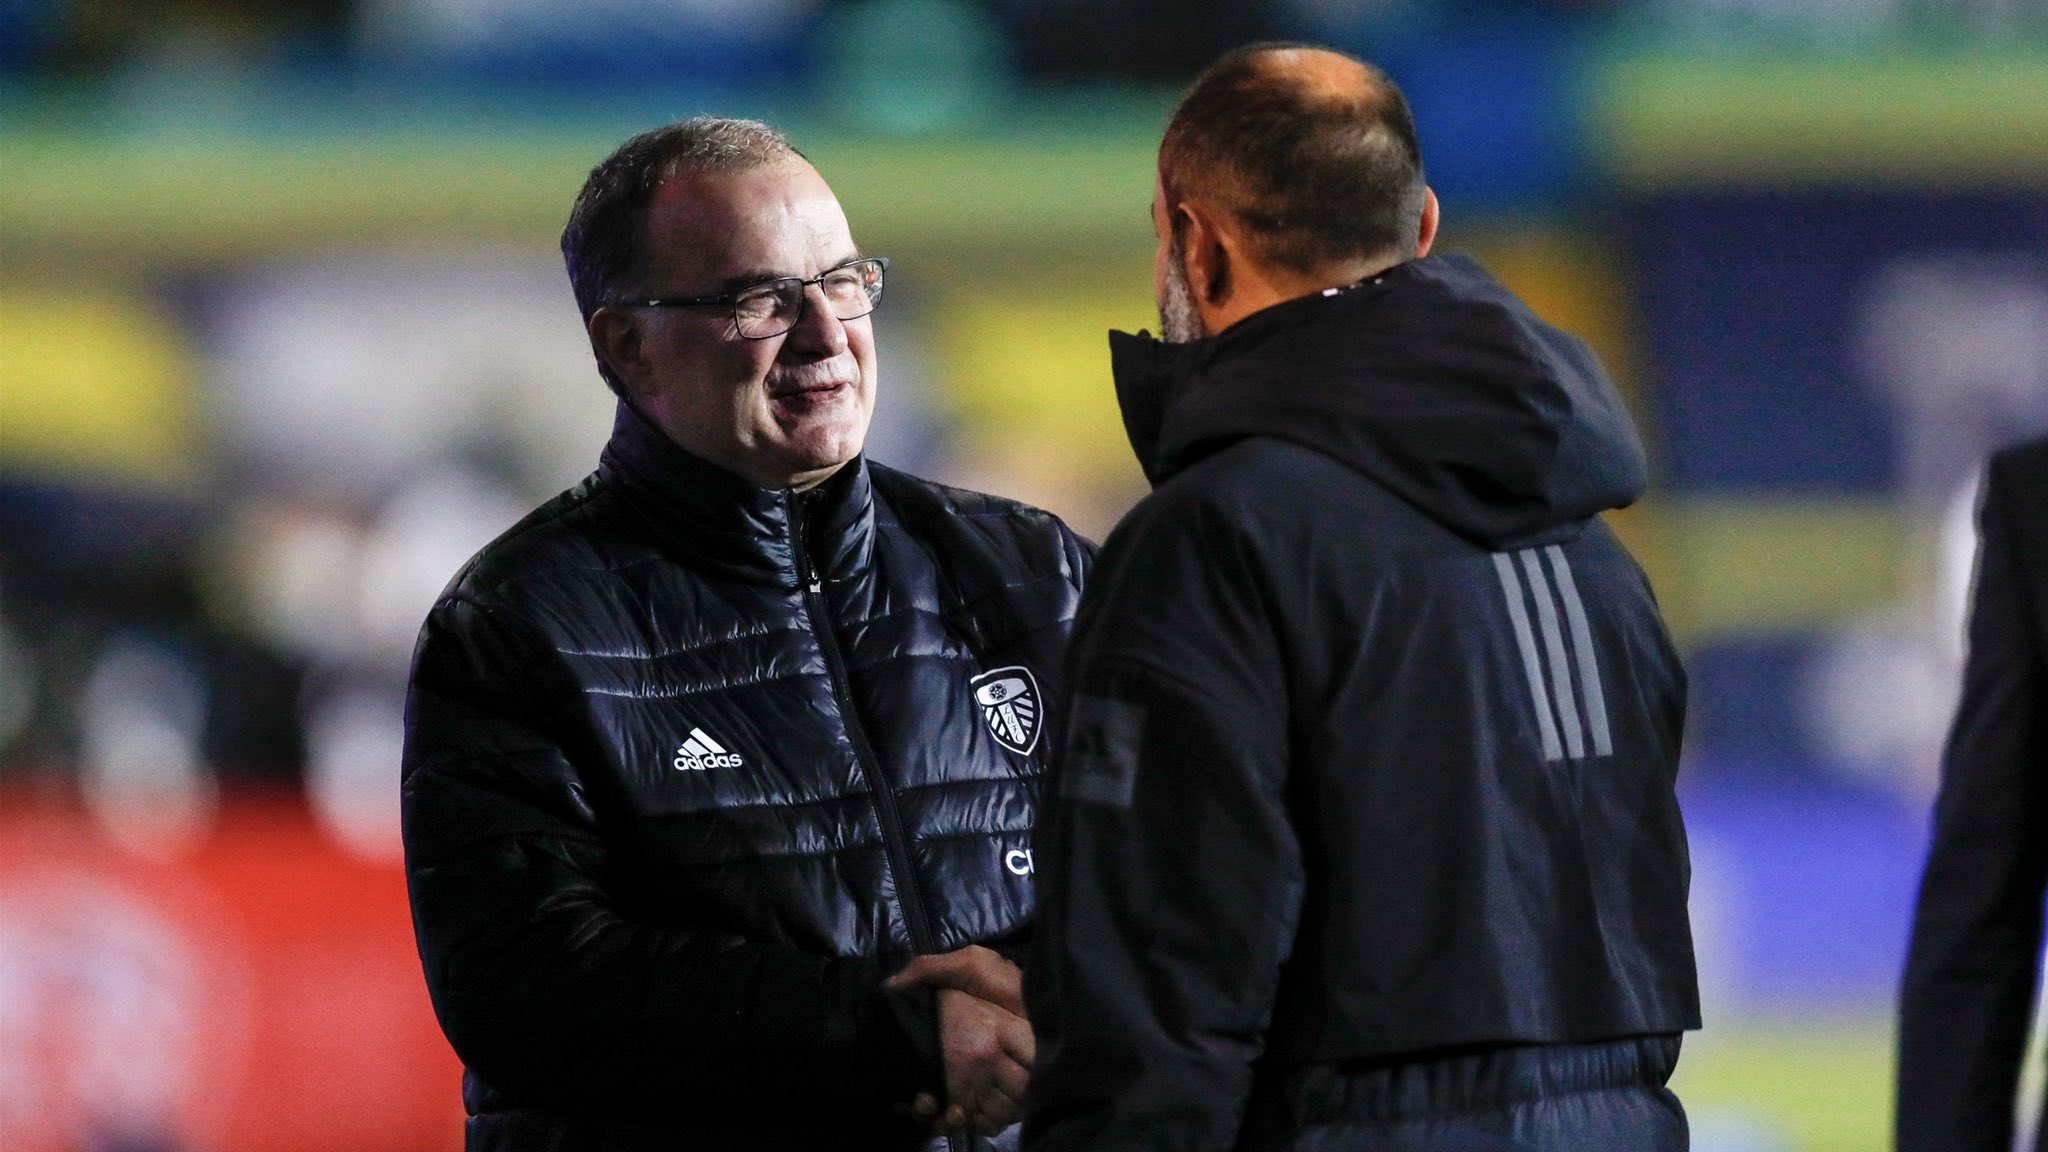 Marcelo Bielsa has England and the world tuned to his channel and it’s a joy to watch